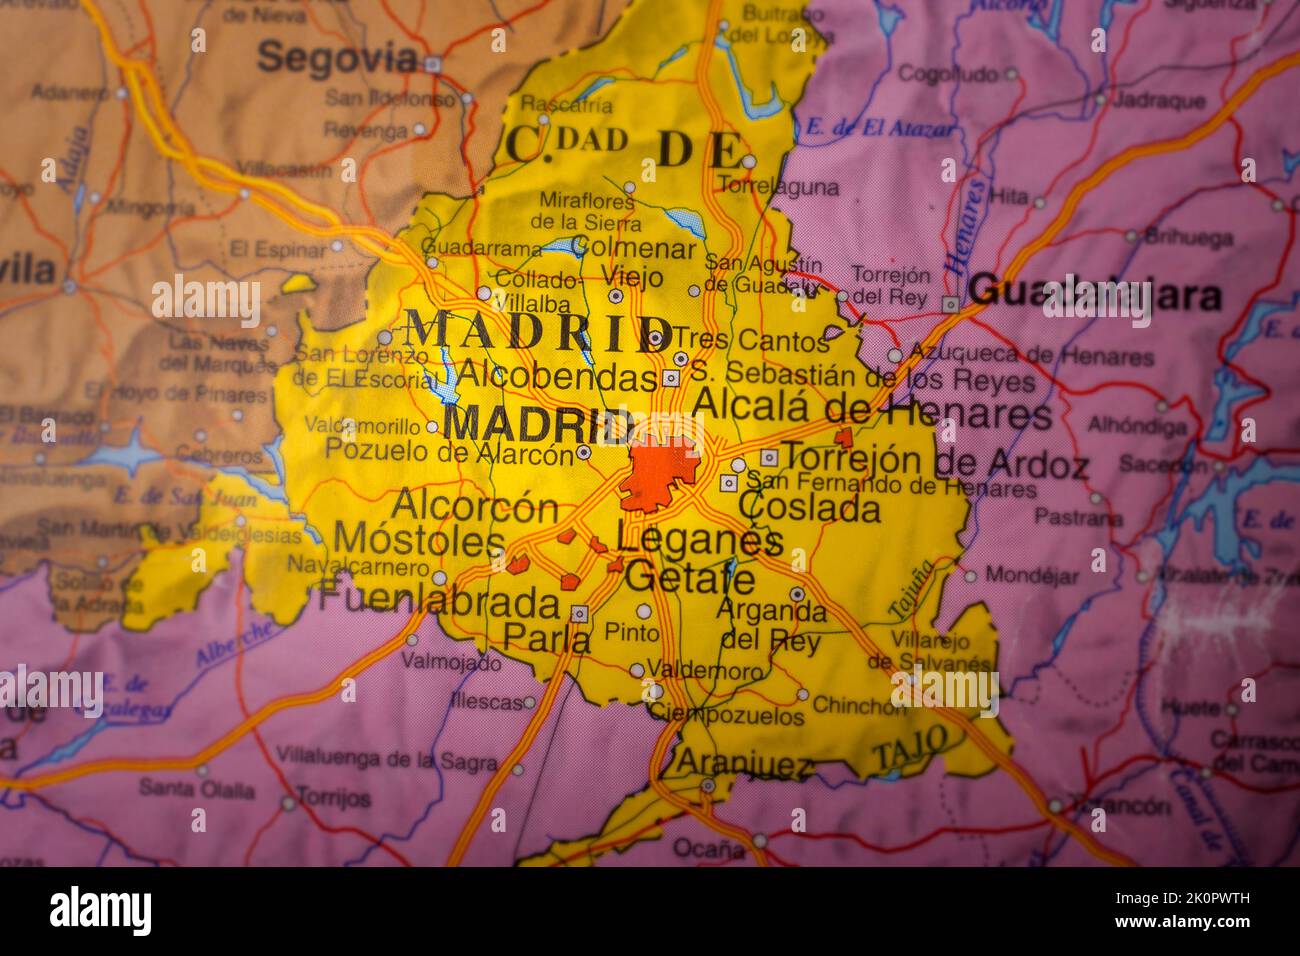 Madrid marked on a map of Spain Stock Photo - Alamy